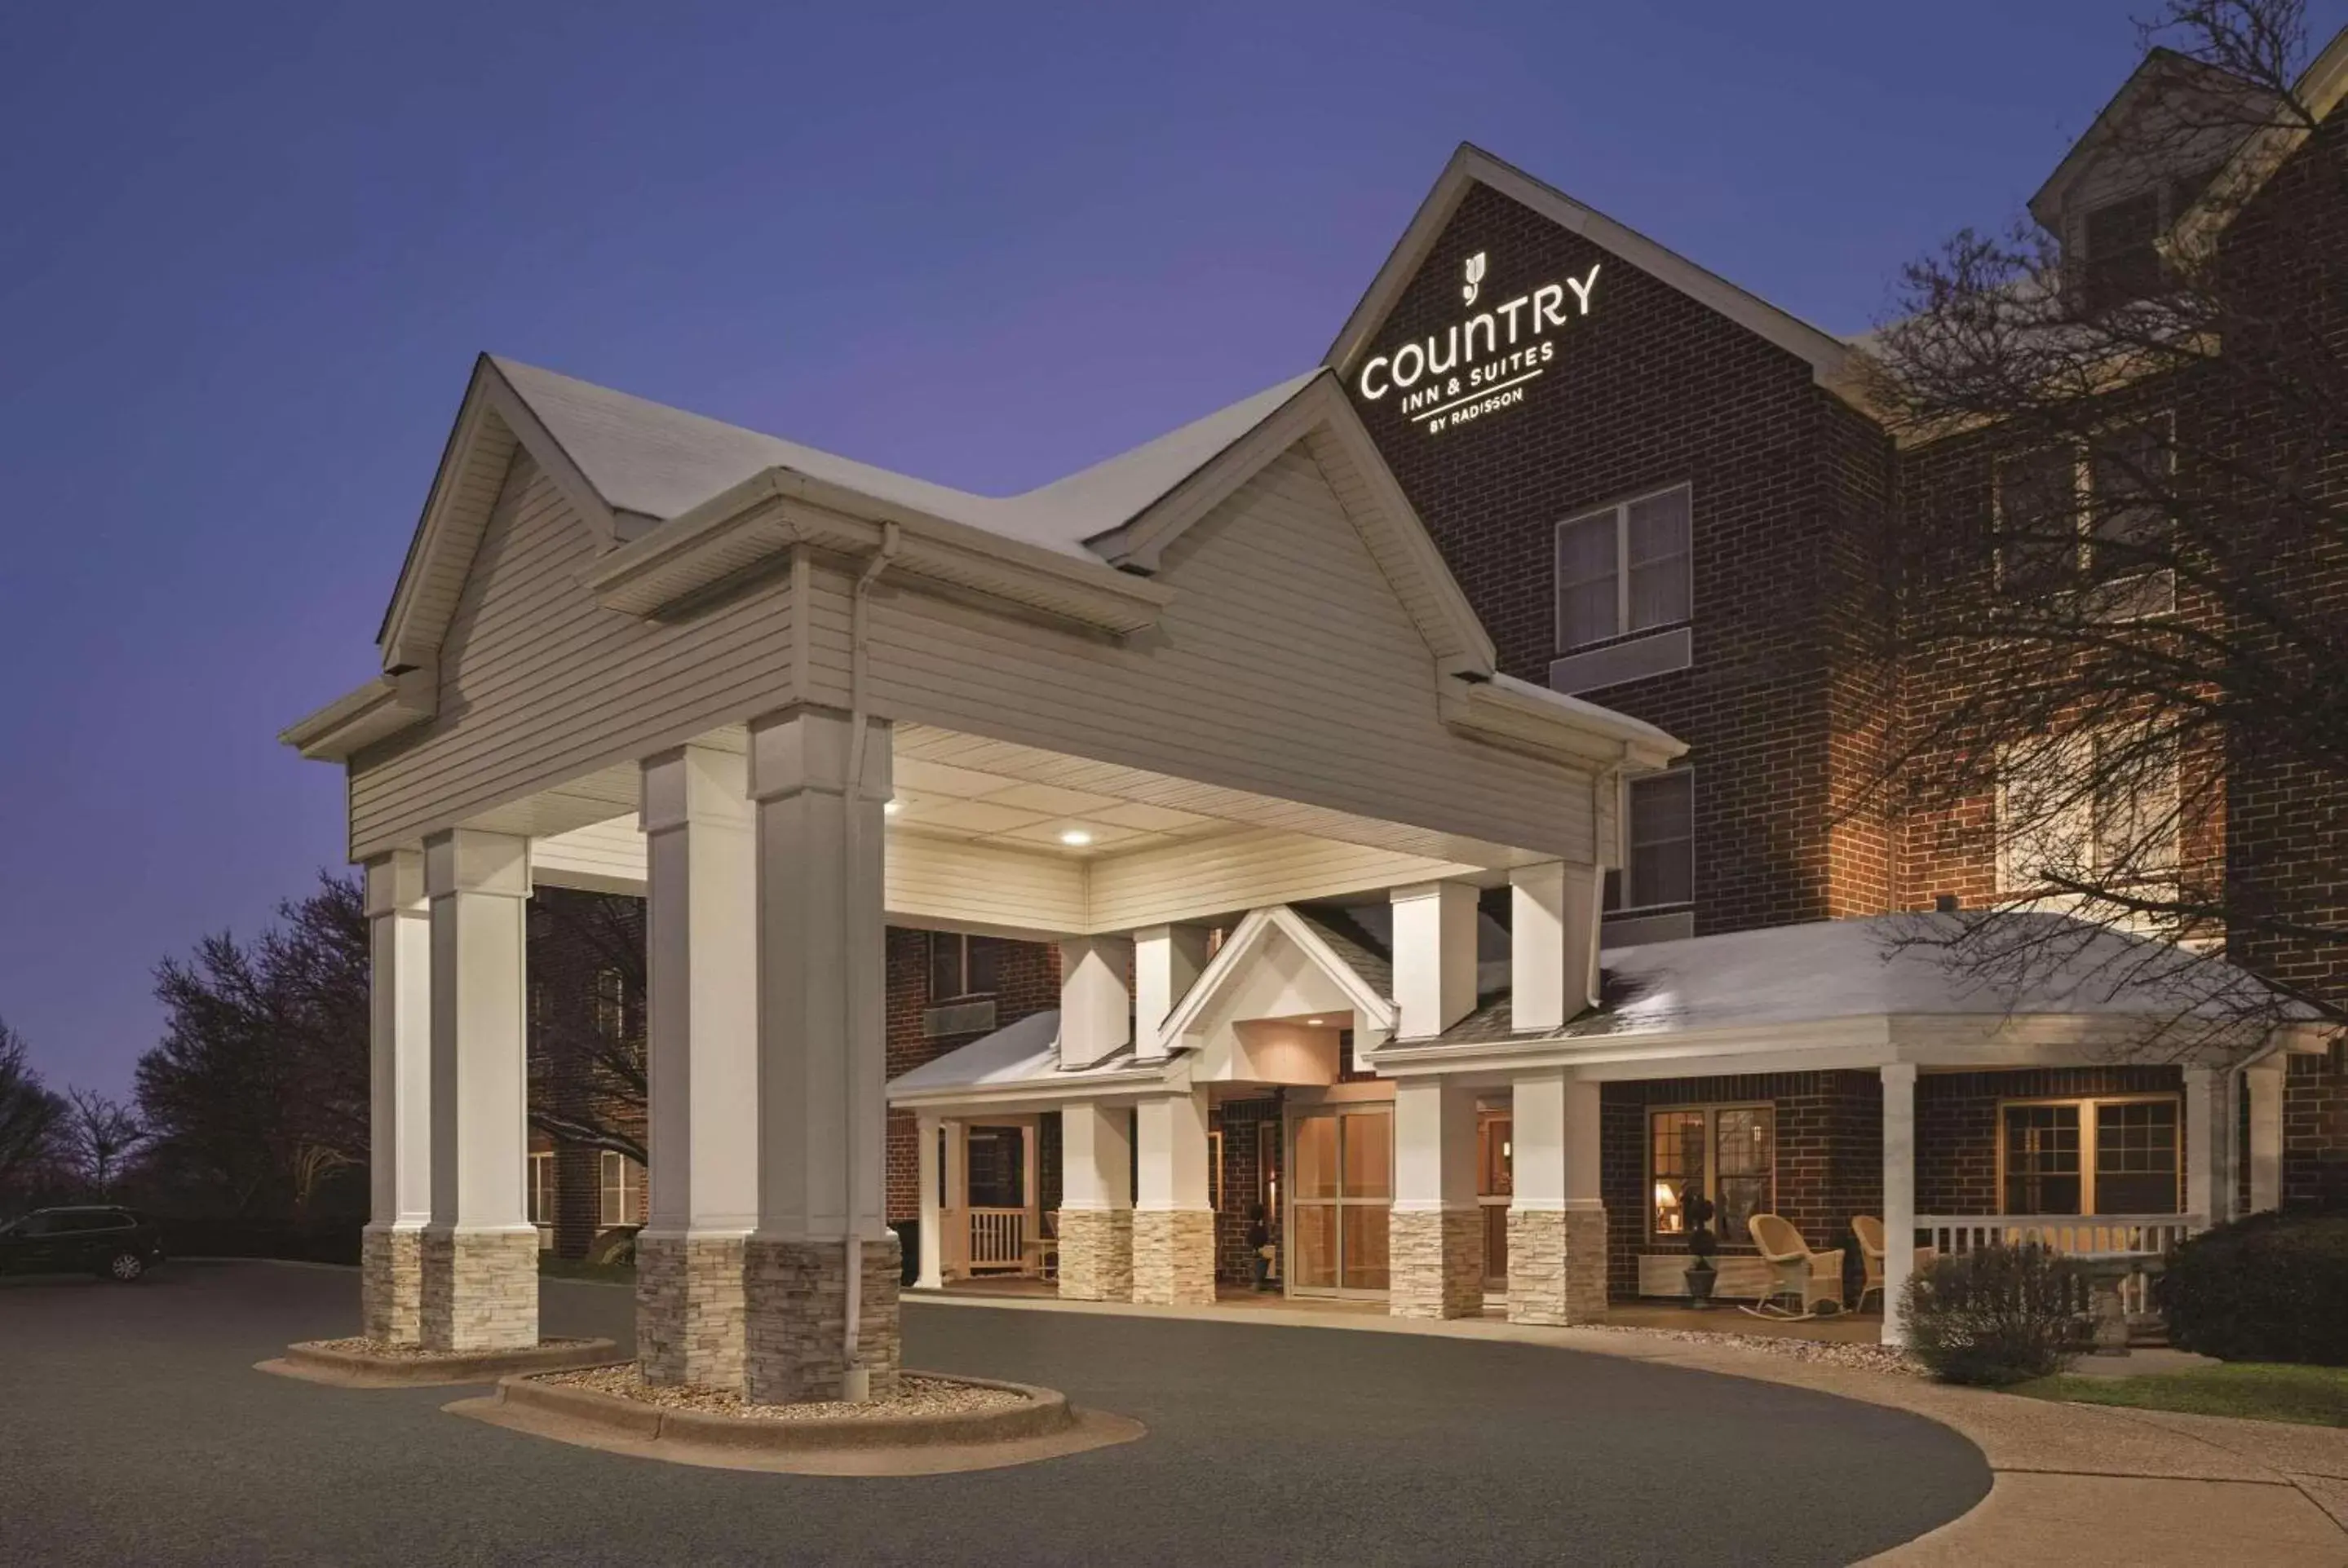 Property Building in Country Inn & Suites by Radisson, Schaumburg, IL